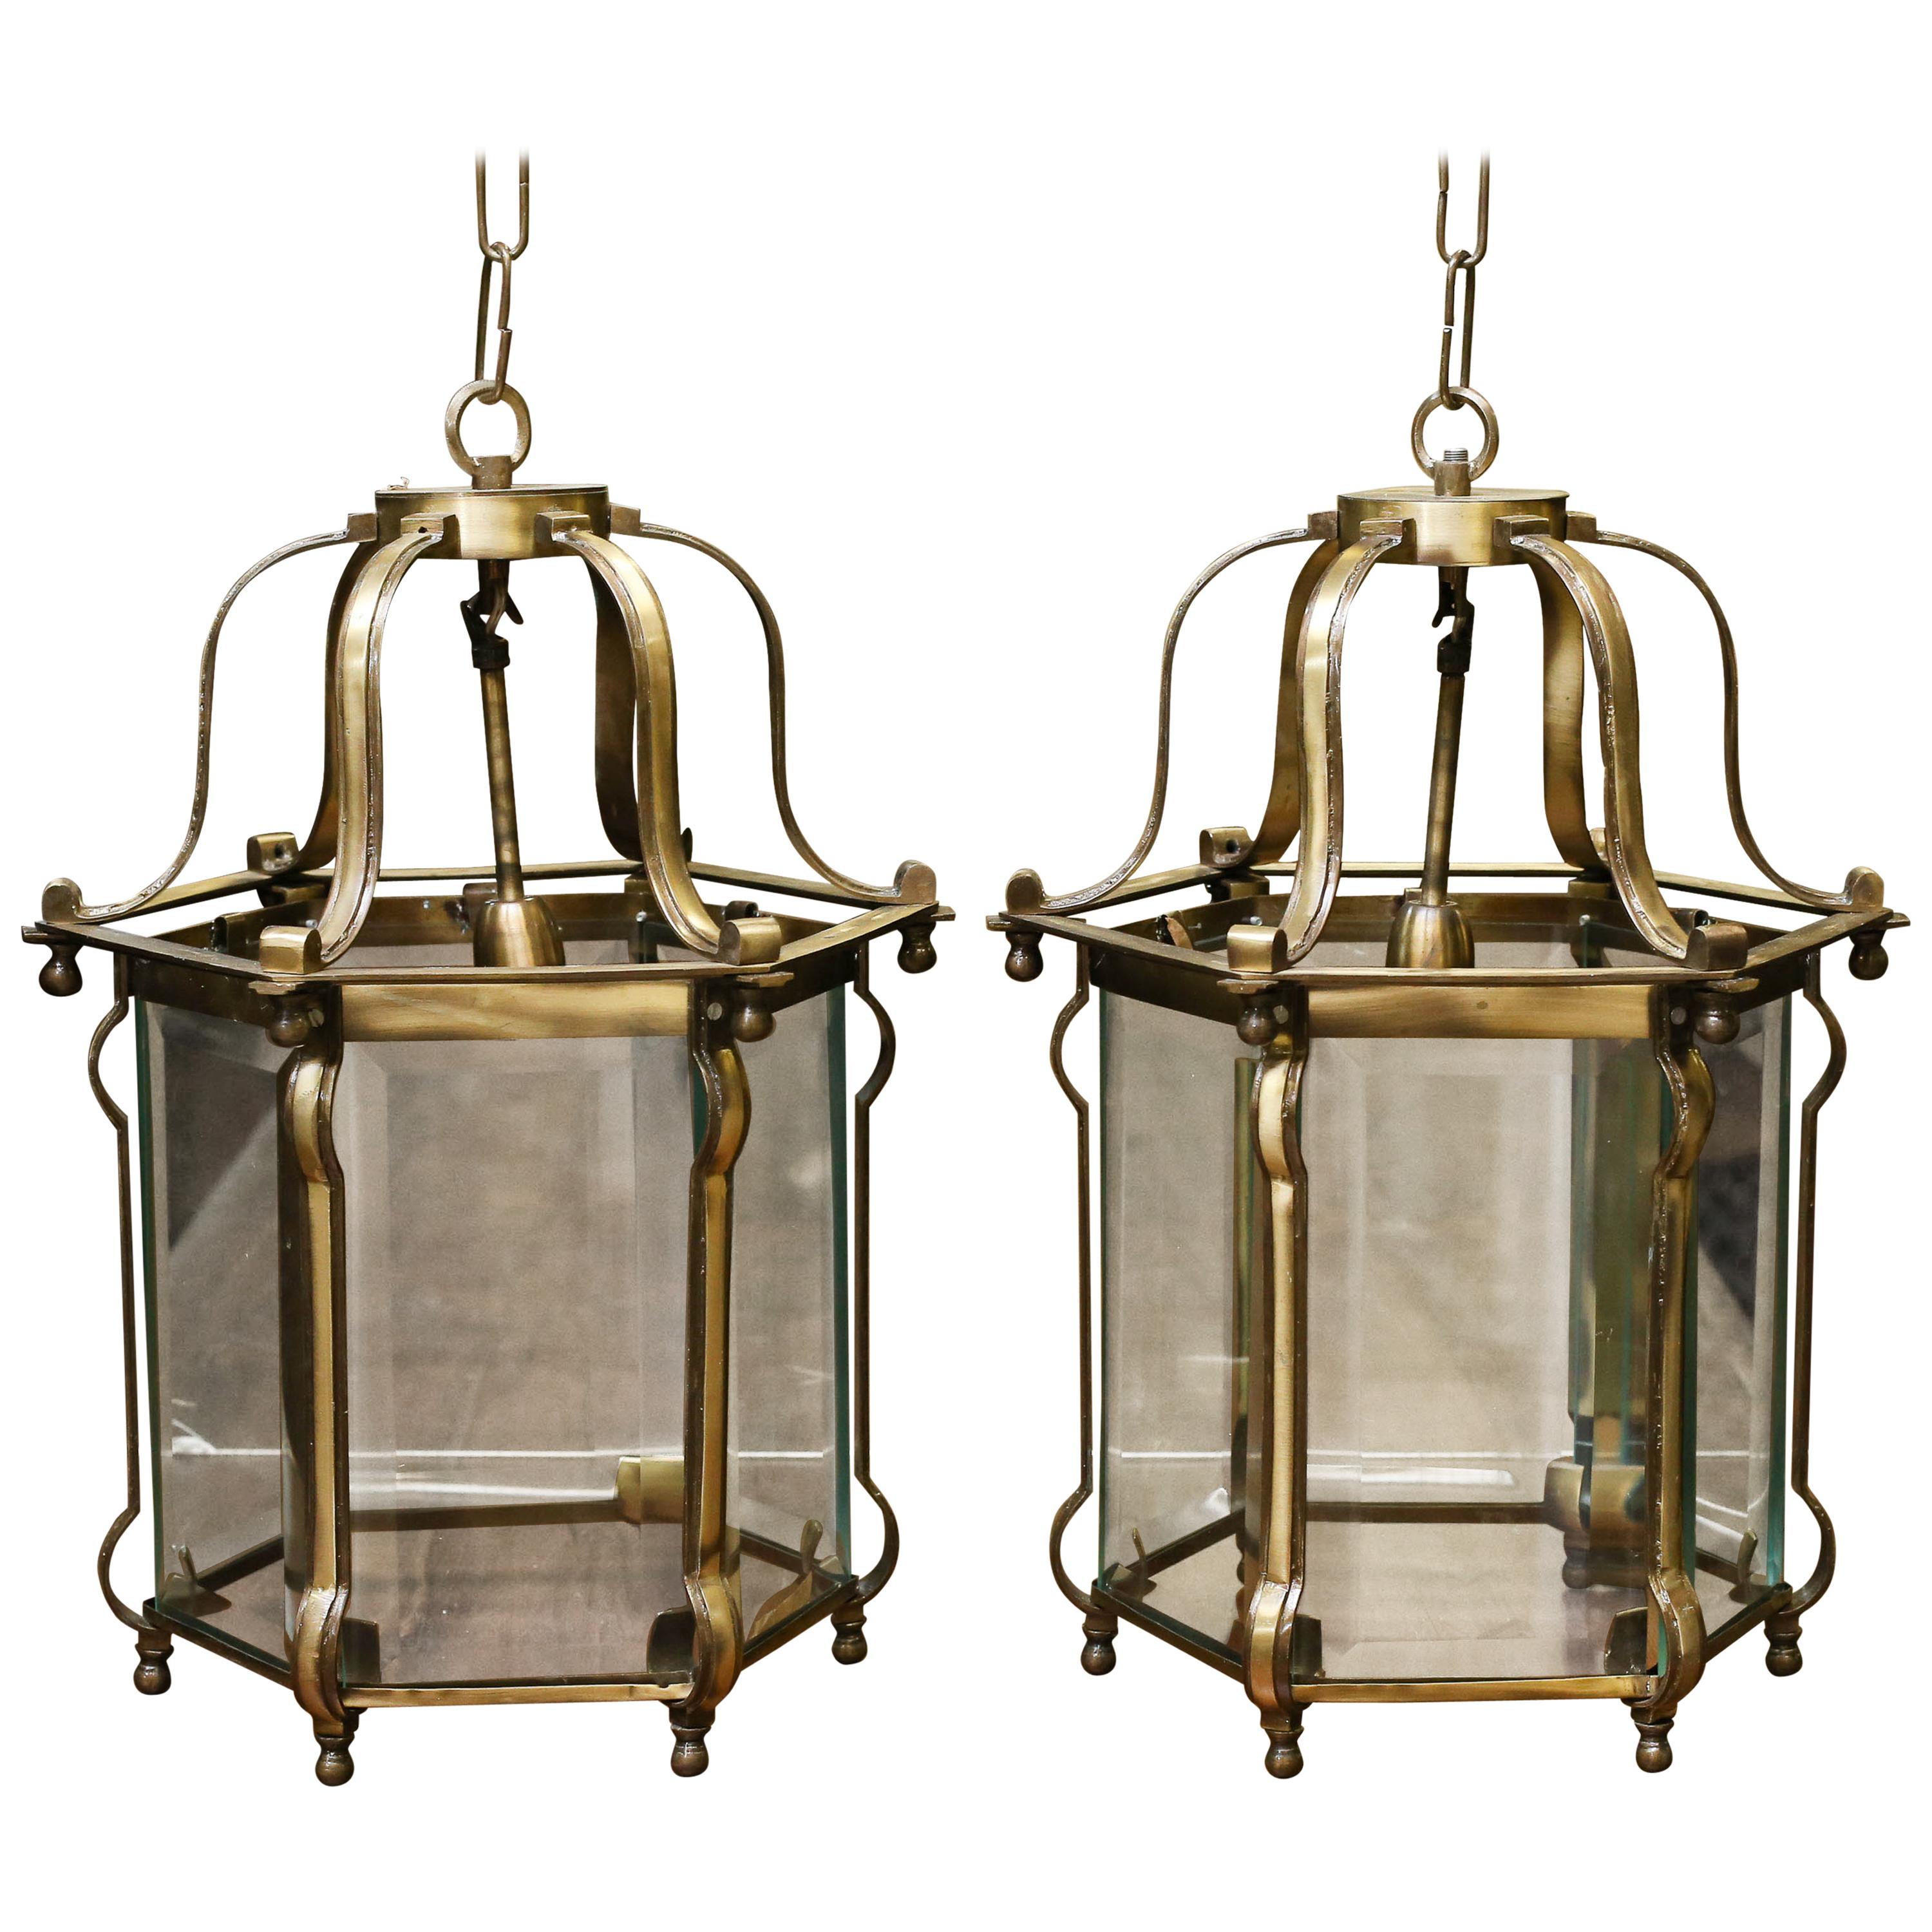 Pair of Solid Brass Superbly Handcrafted Hanging Lanterns from a Settler's Home For Sale